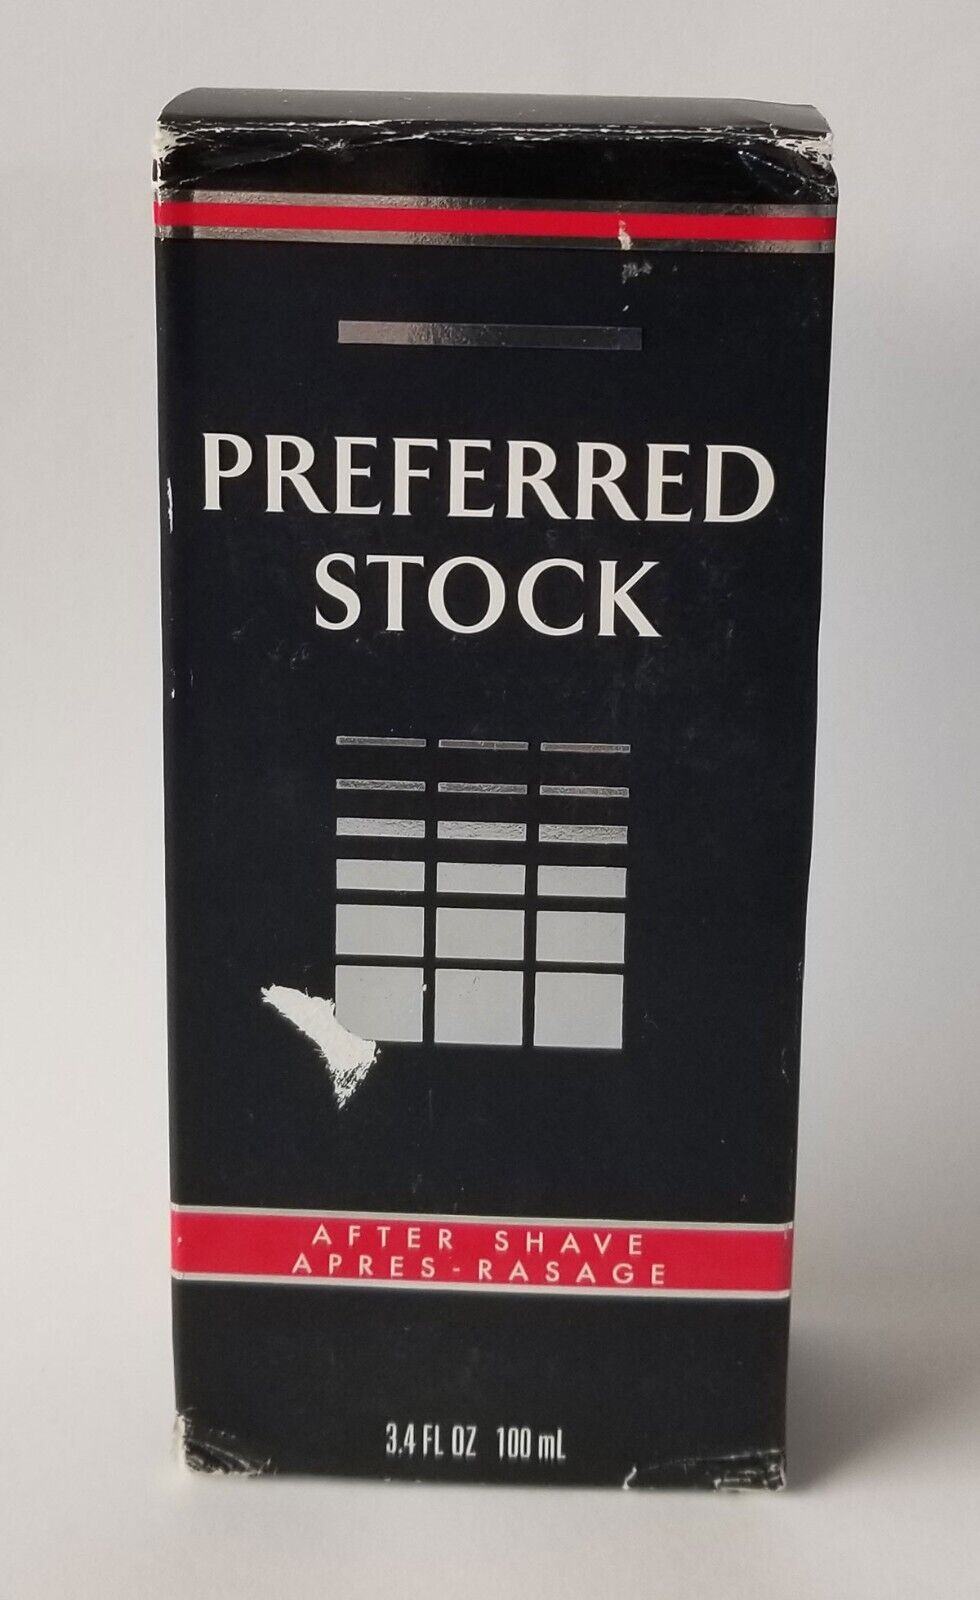 Preferred Stock After shave For Men 100ml By Coty